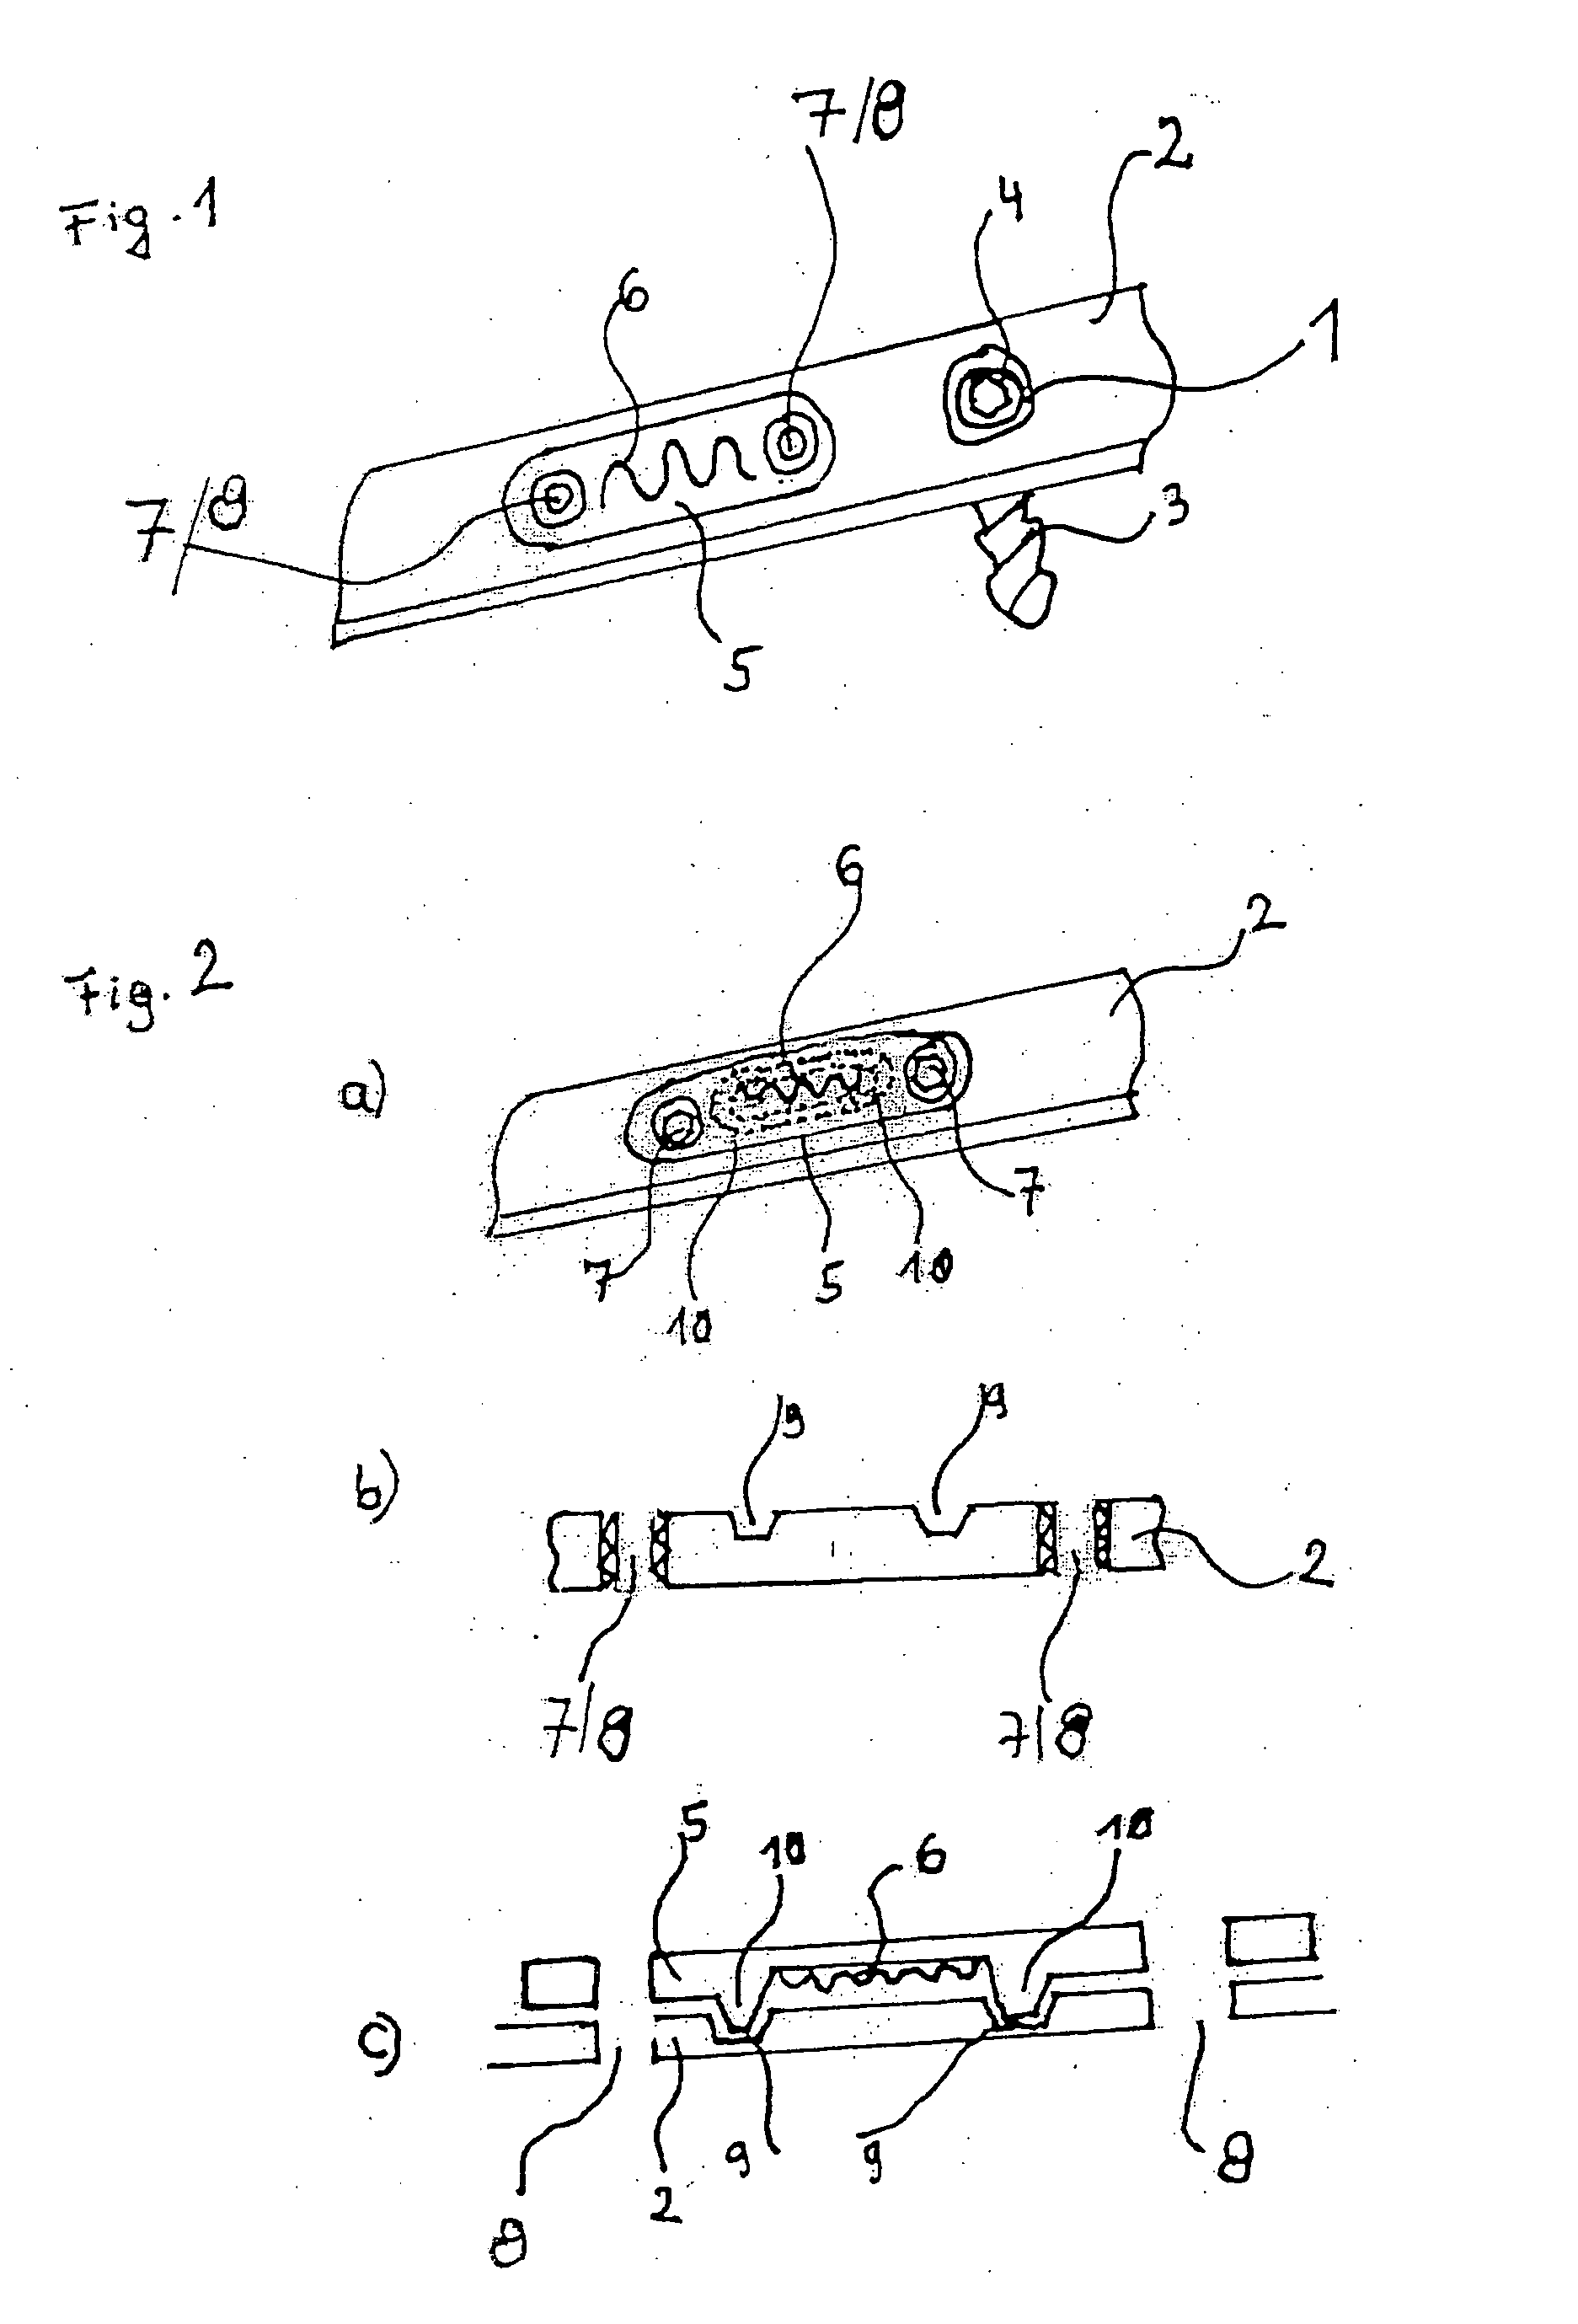 Fixation system for bones with a sensor and telemetry system